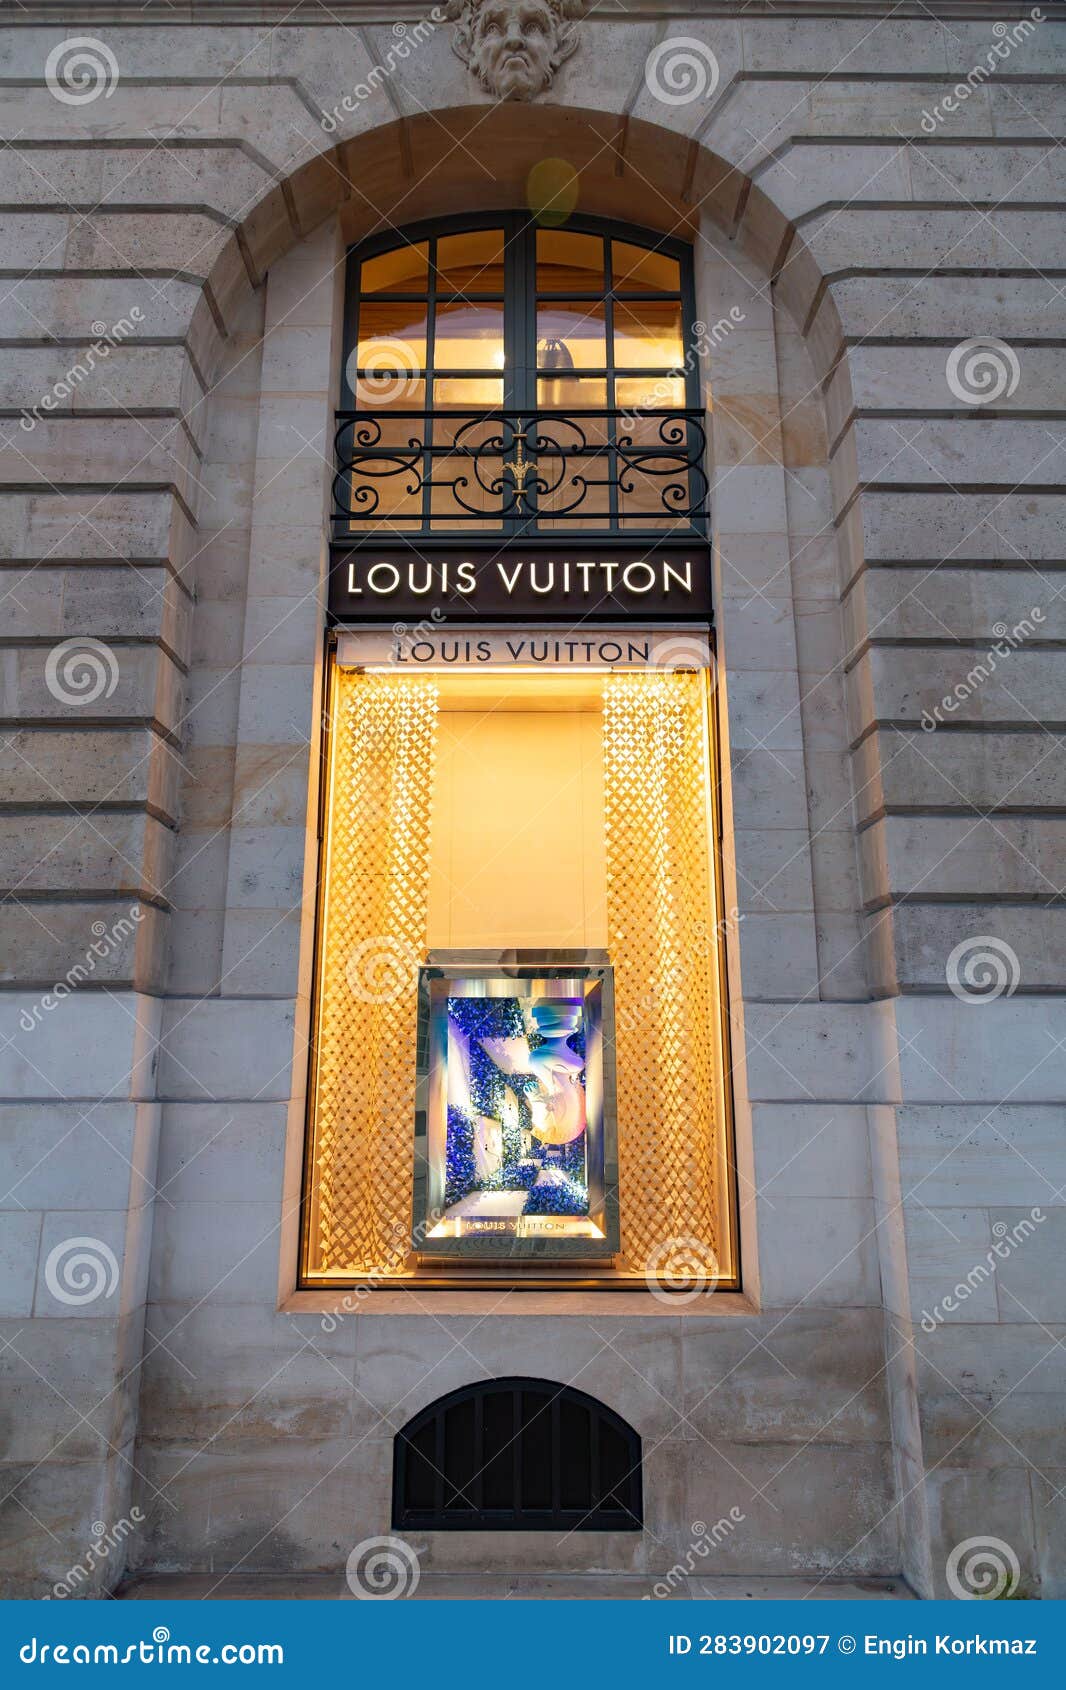 What is Louis Vuitton known for? French Luxury Brand